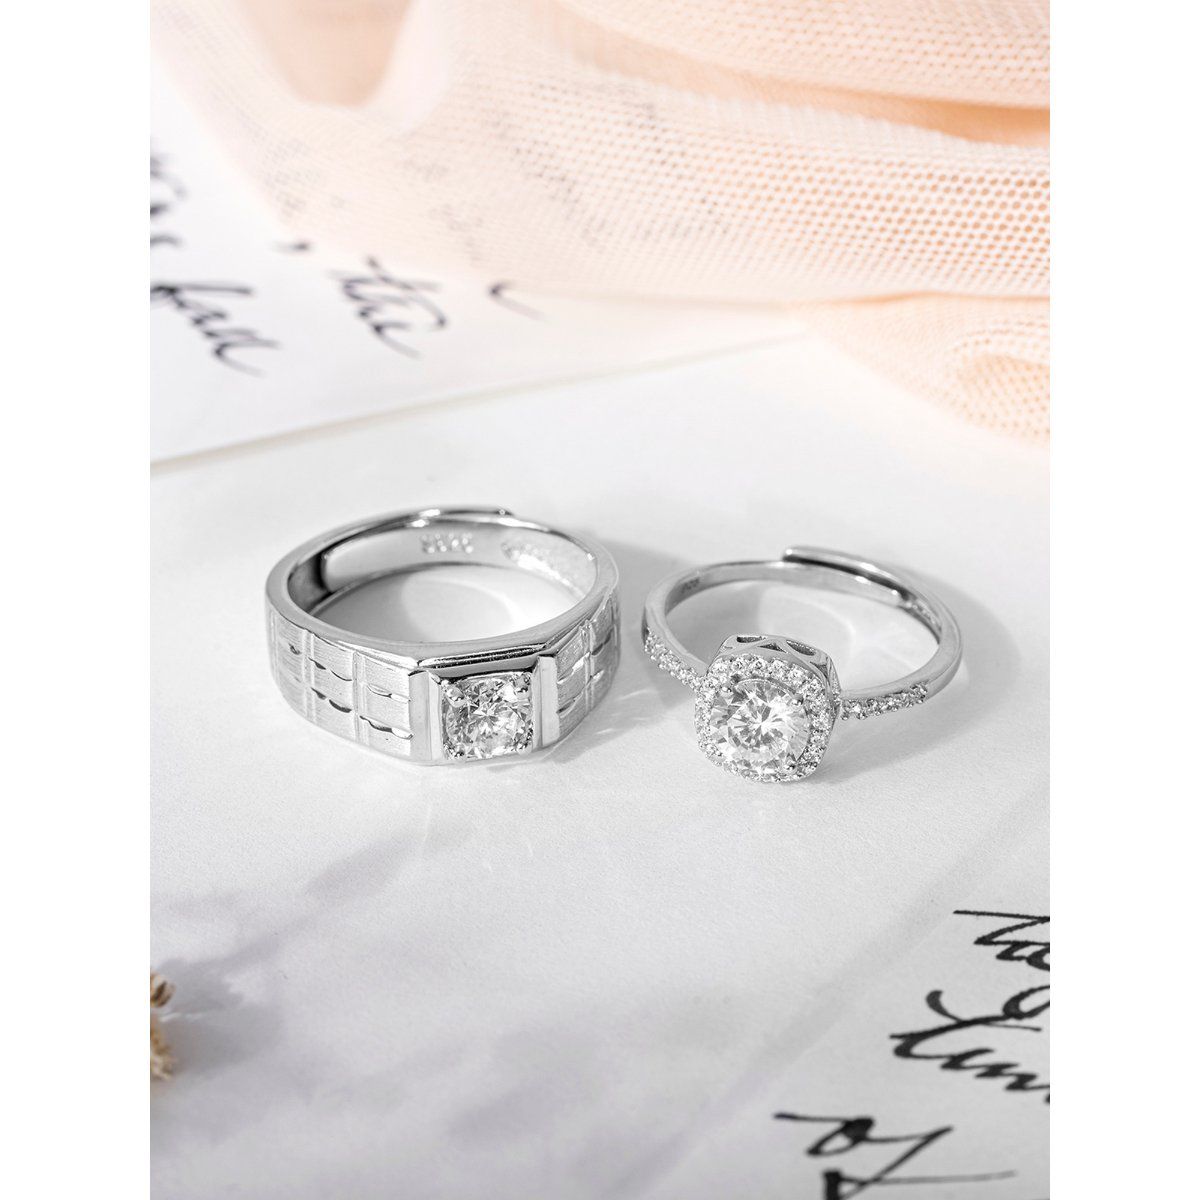 Enchanting Stones Adjustable 925 Sterling Silver Couple Rings